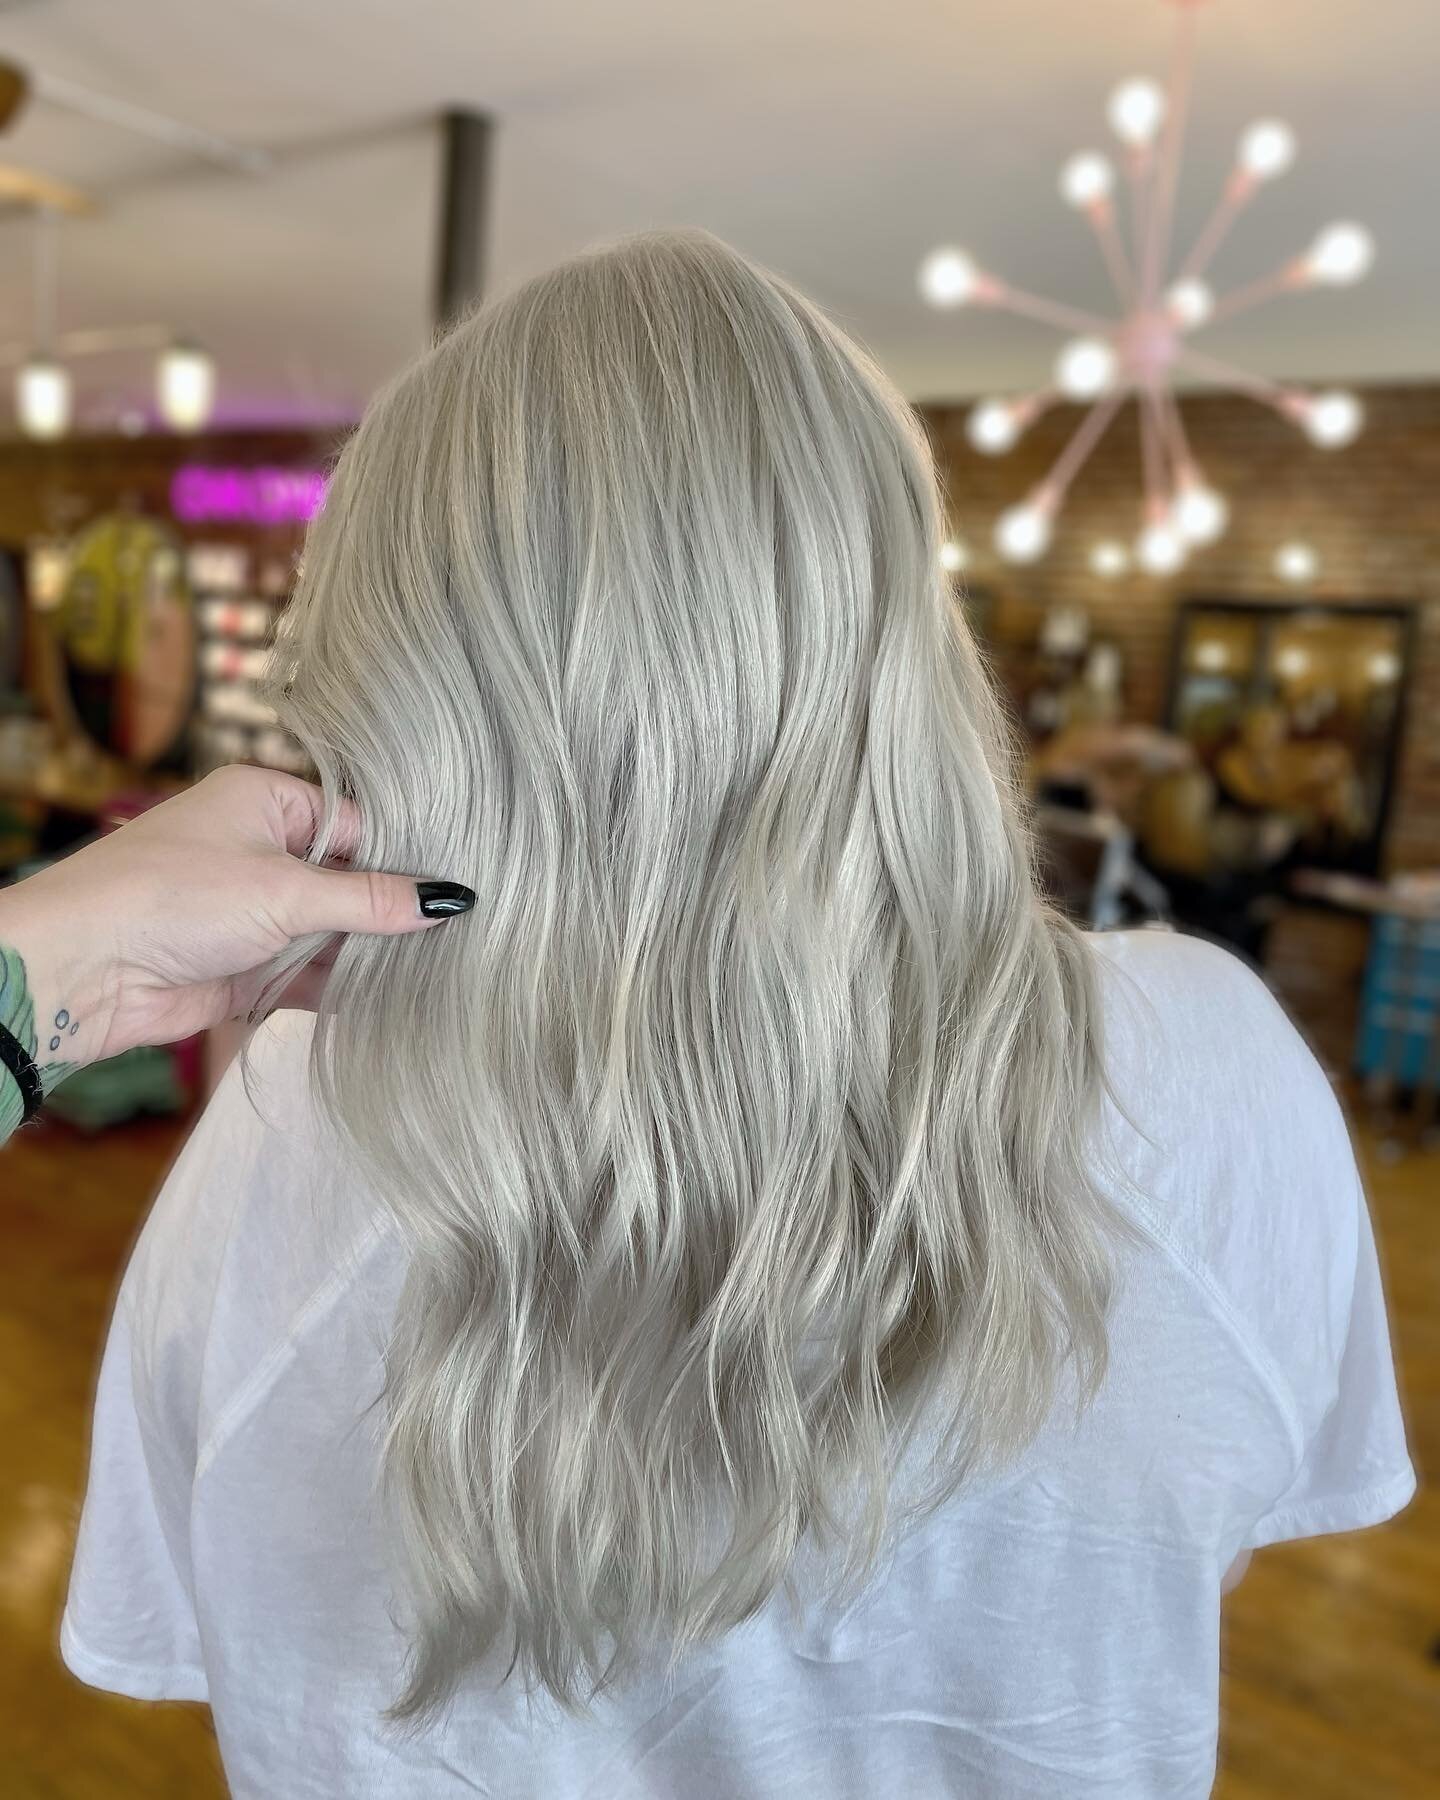 ❄️ It stays chilly in my chair ❄️ 
Click the link in my bio to book 

#wellahair #blondehair #sharethelex #lexingtonkentucky #lexingtonhairstylist #lexingtonhairsalons